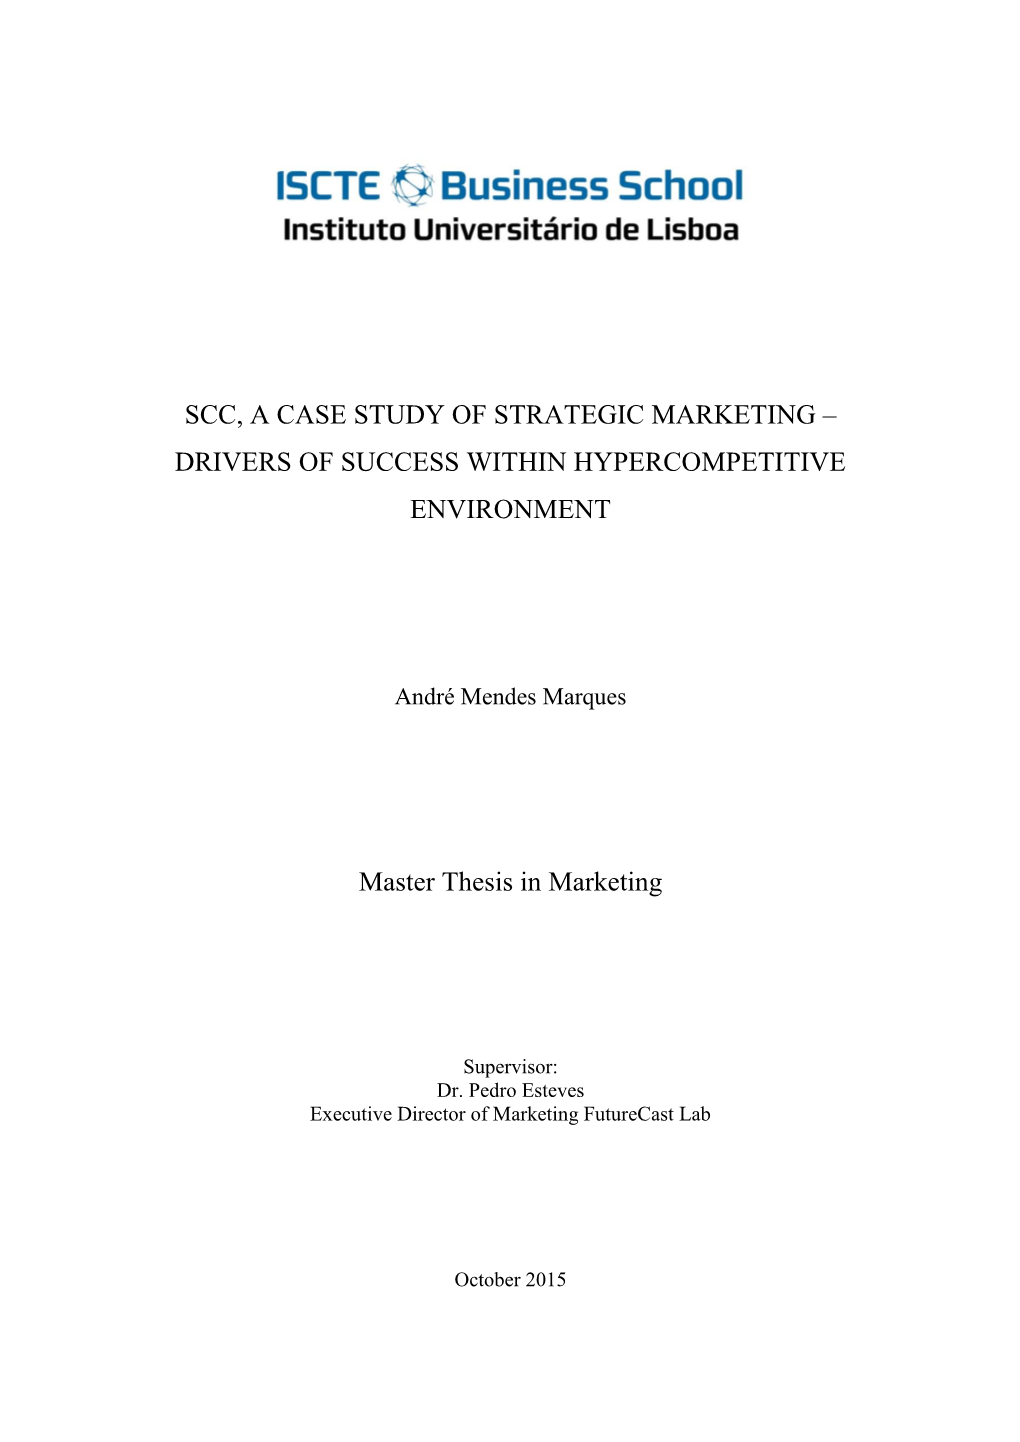 Scc, a Case Study of Strategic Marketing – Drivers of Success Within Hypercompetitive Environment